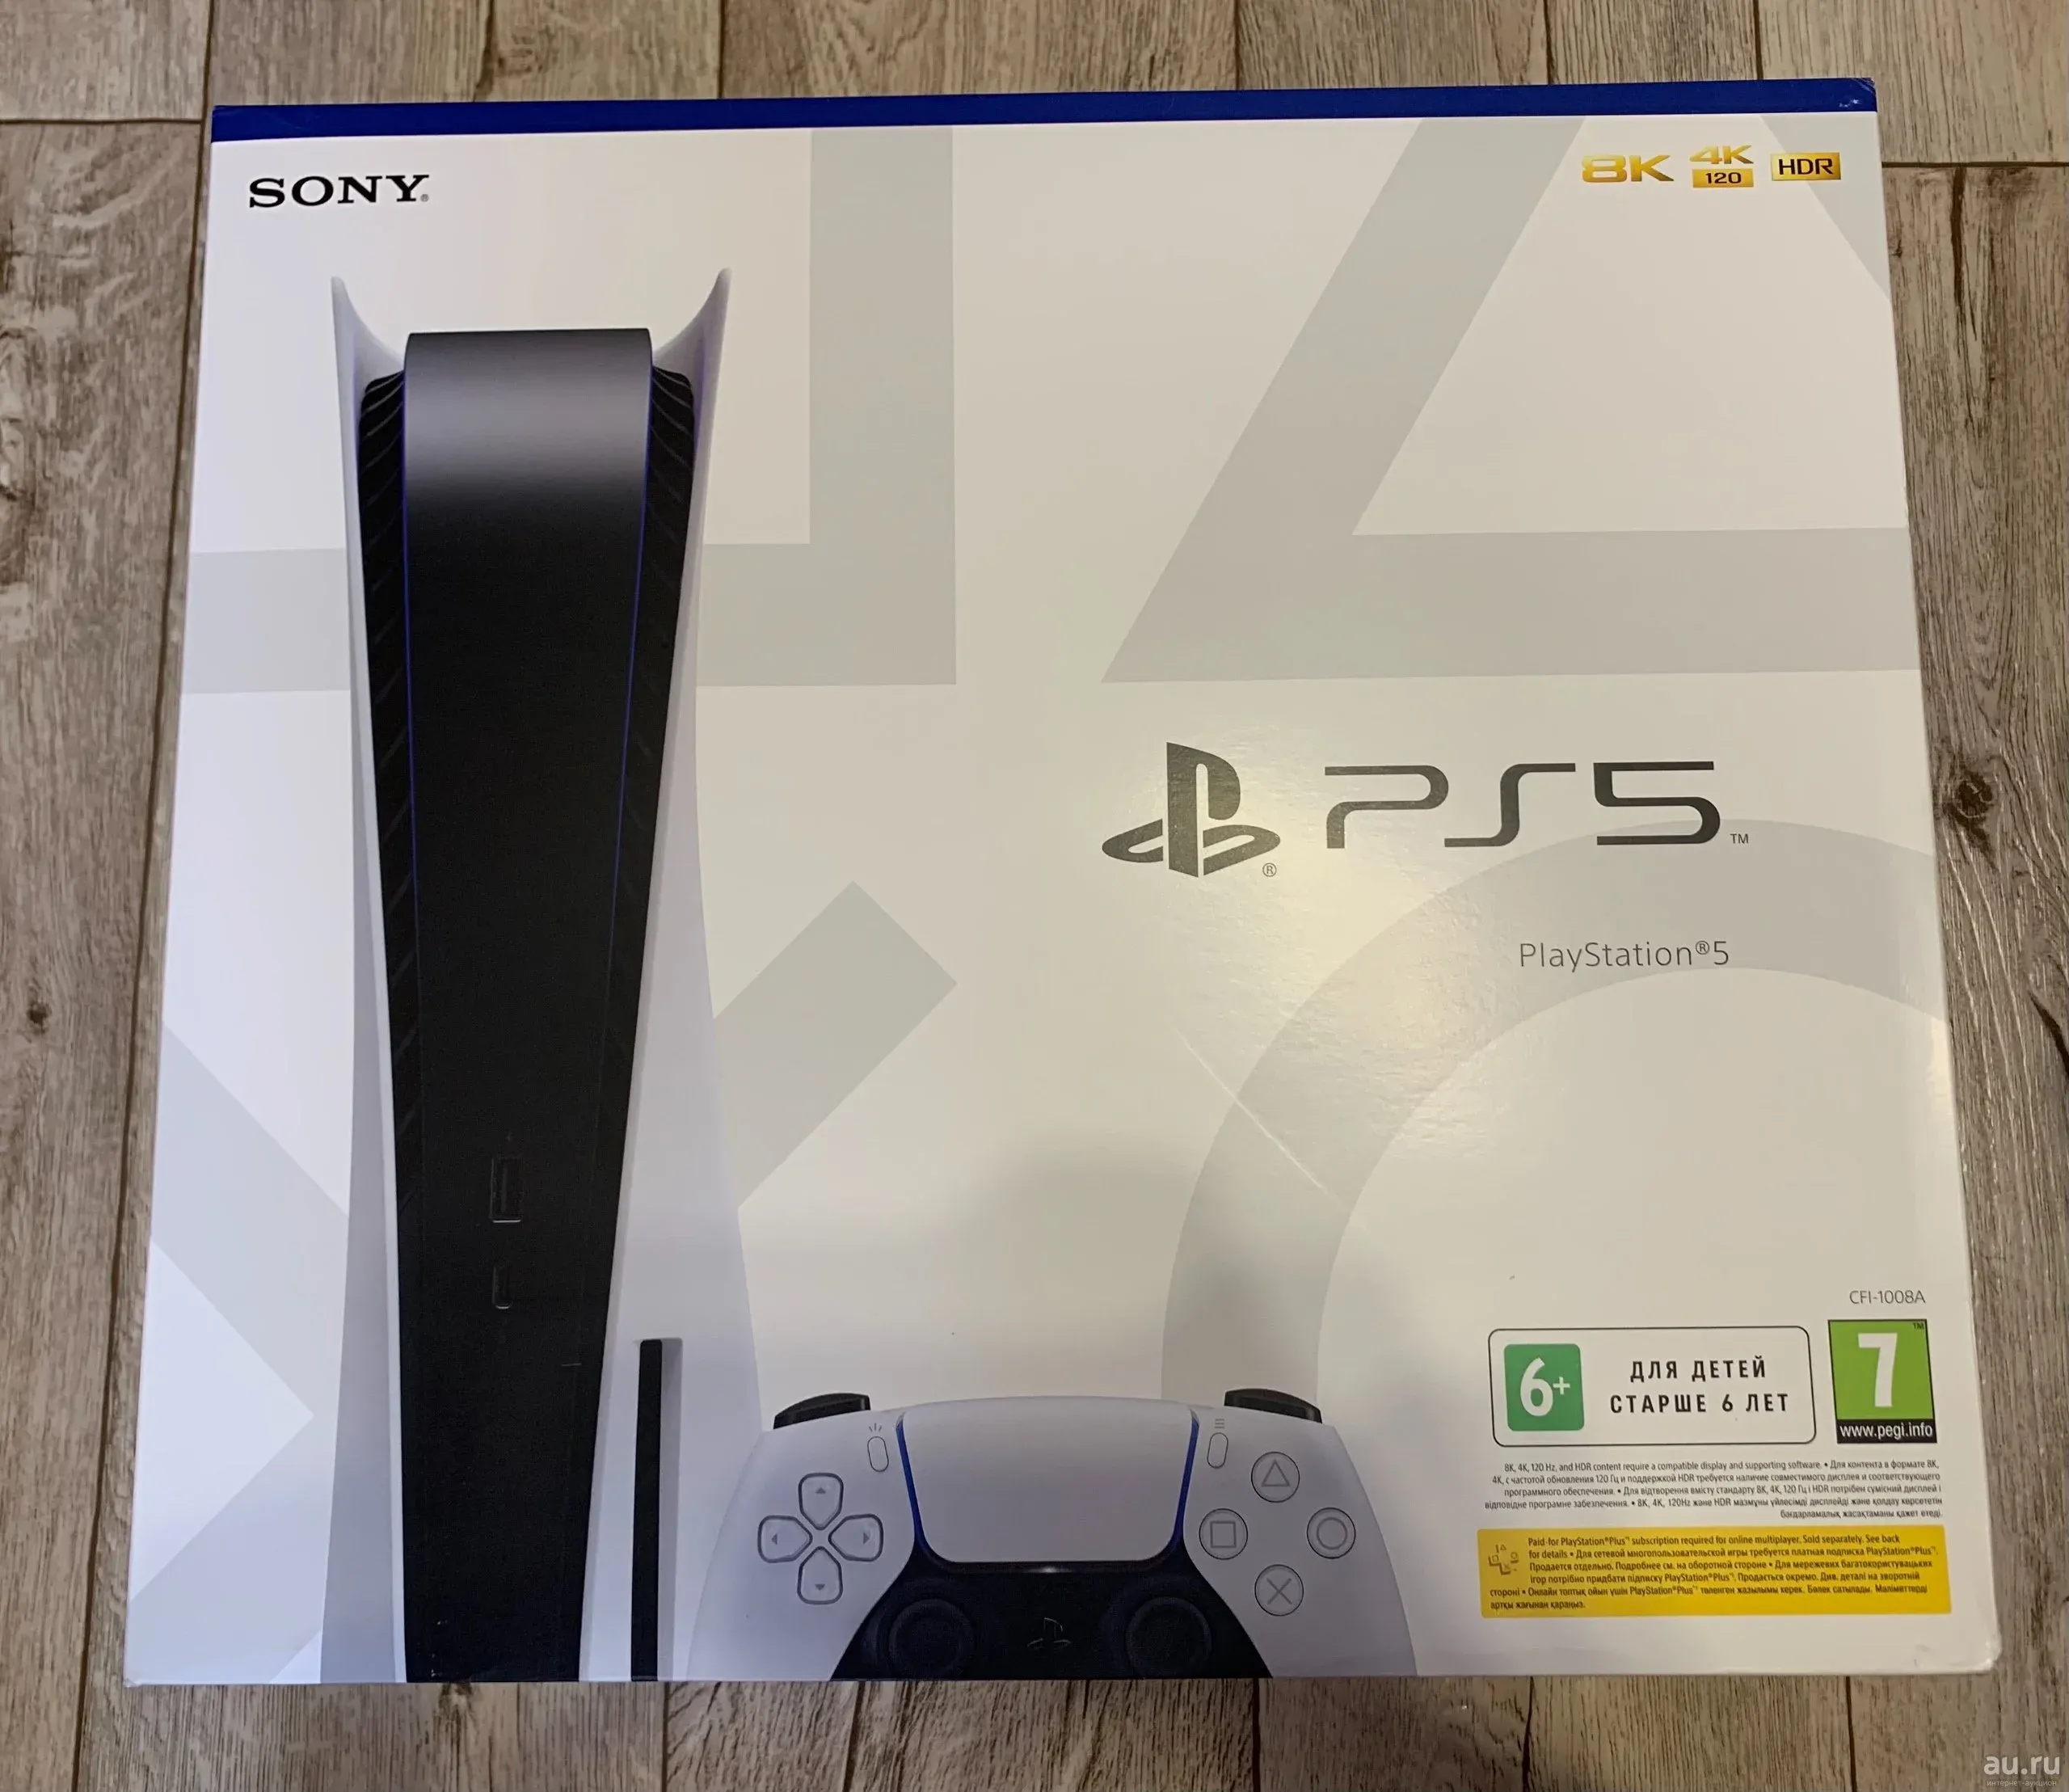 Ps5 cfi 2000. Sony PLAYSTATION ps5 Blu-ray. Sony PLAYSTATION 5 825 ГБ. Ps5 с дисководом. Приставка PLAYSTATION С дисководом Sony.